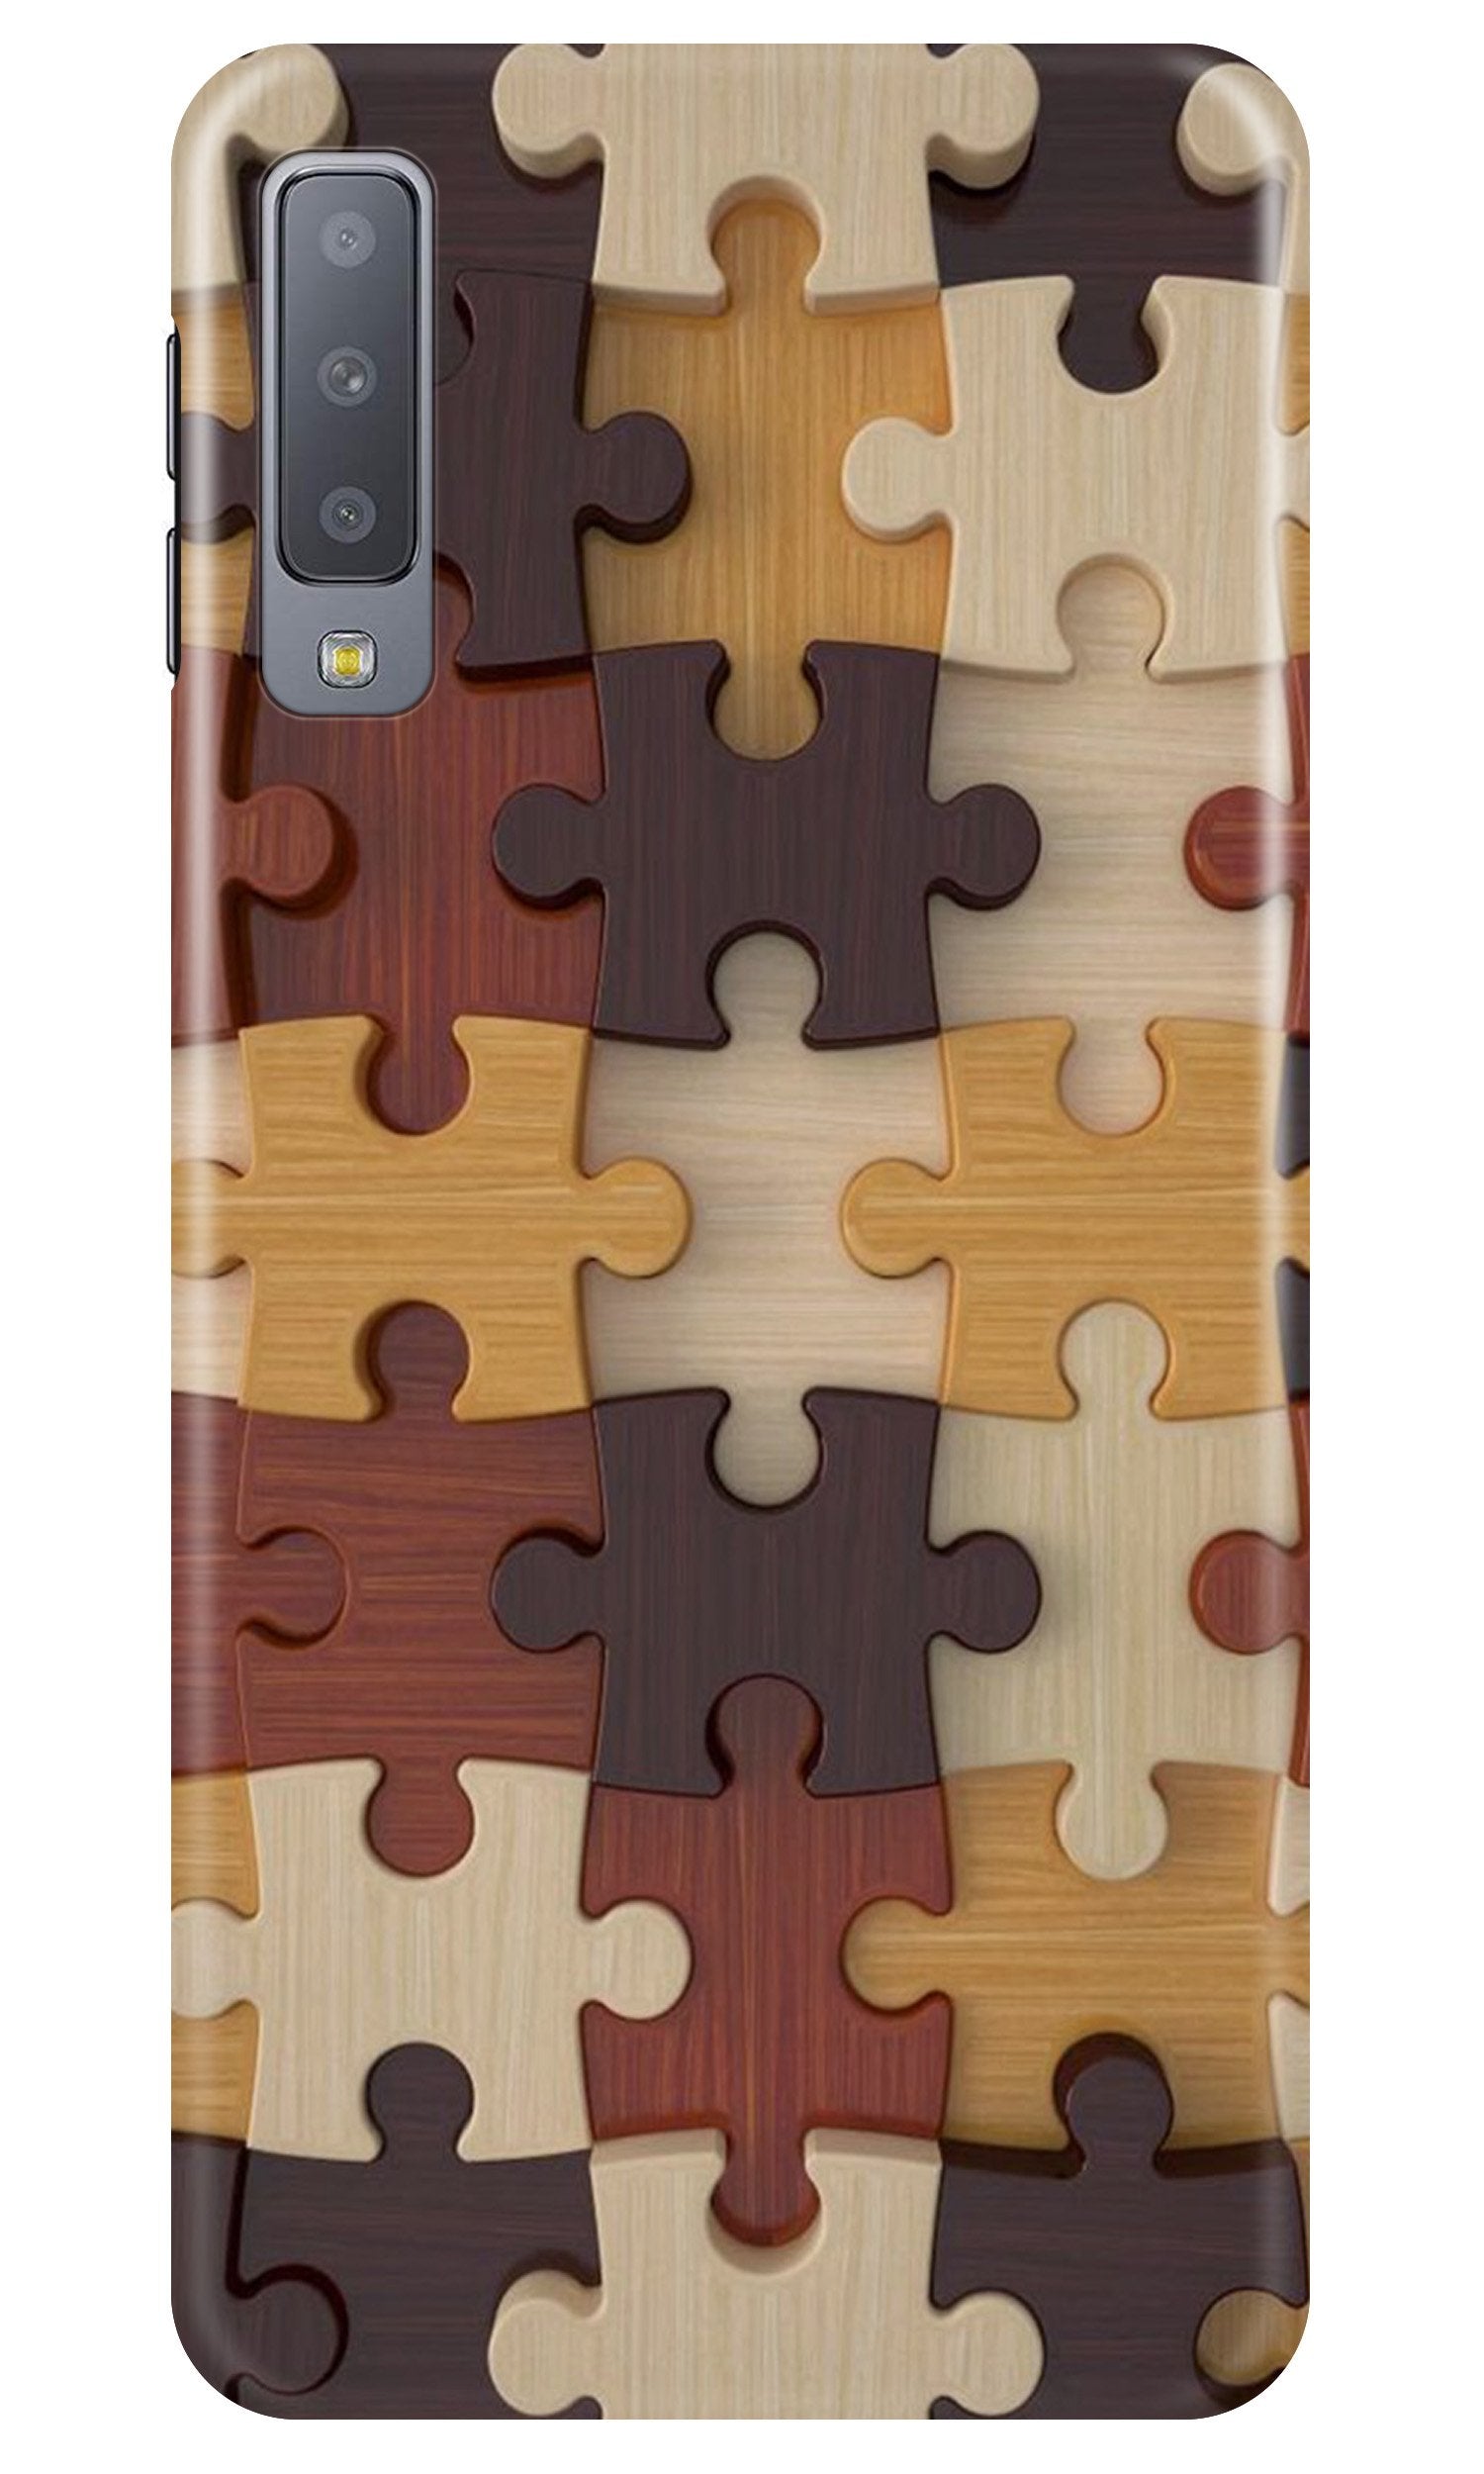 Puzzle Pattern Case for Samung Galaxy A70s (Design No. 217)